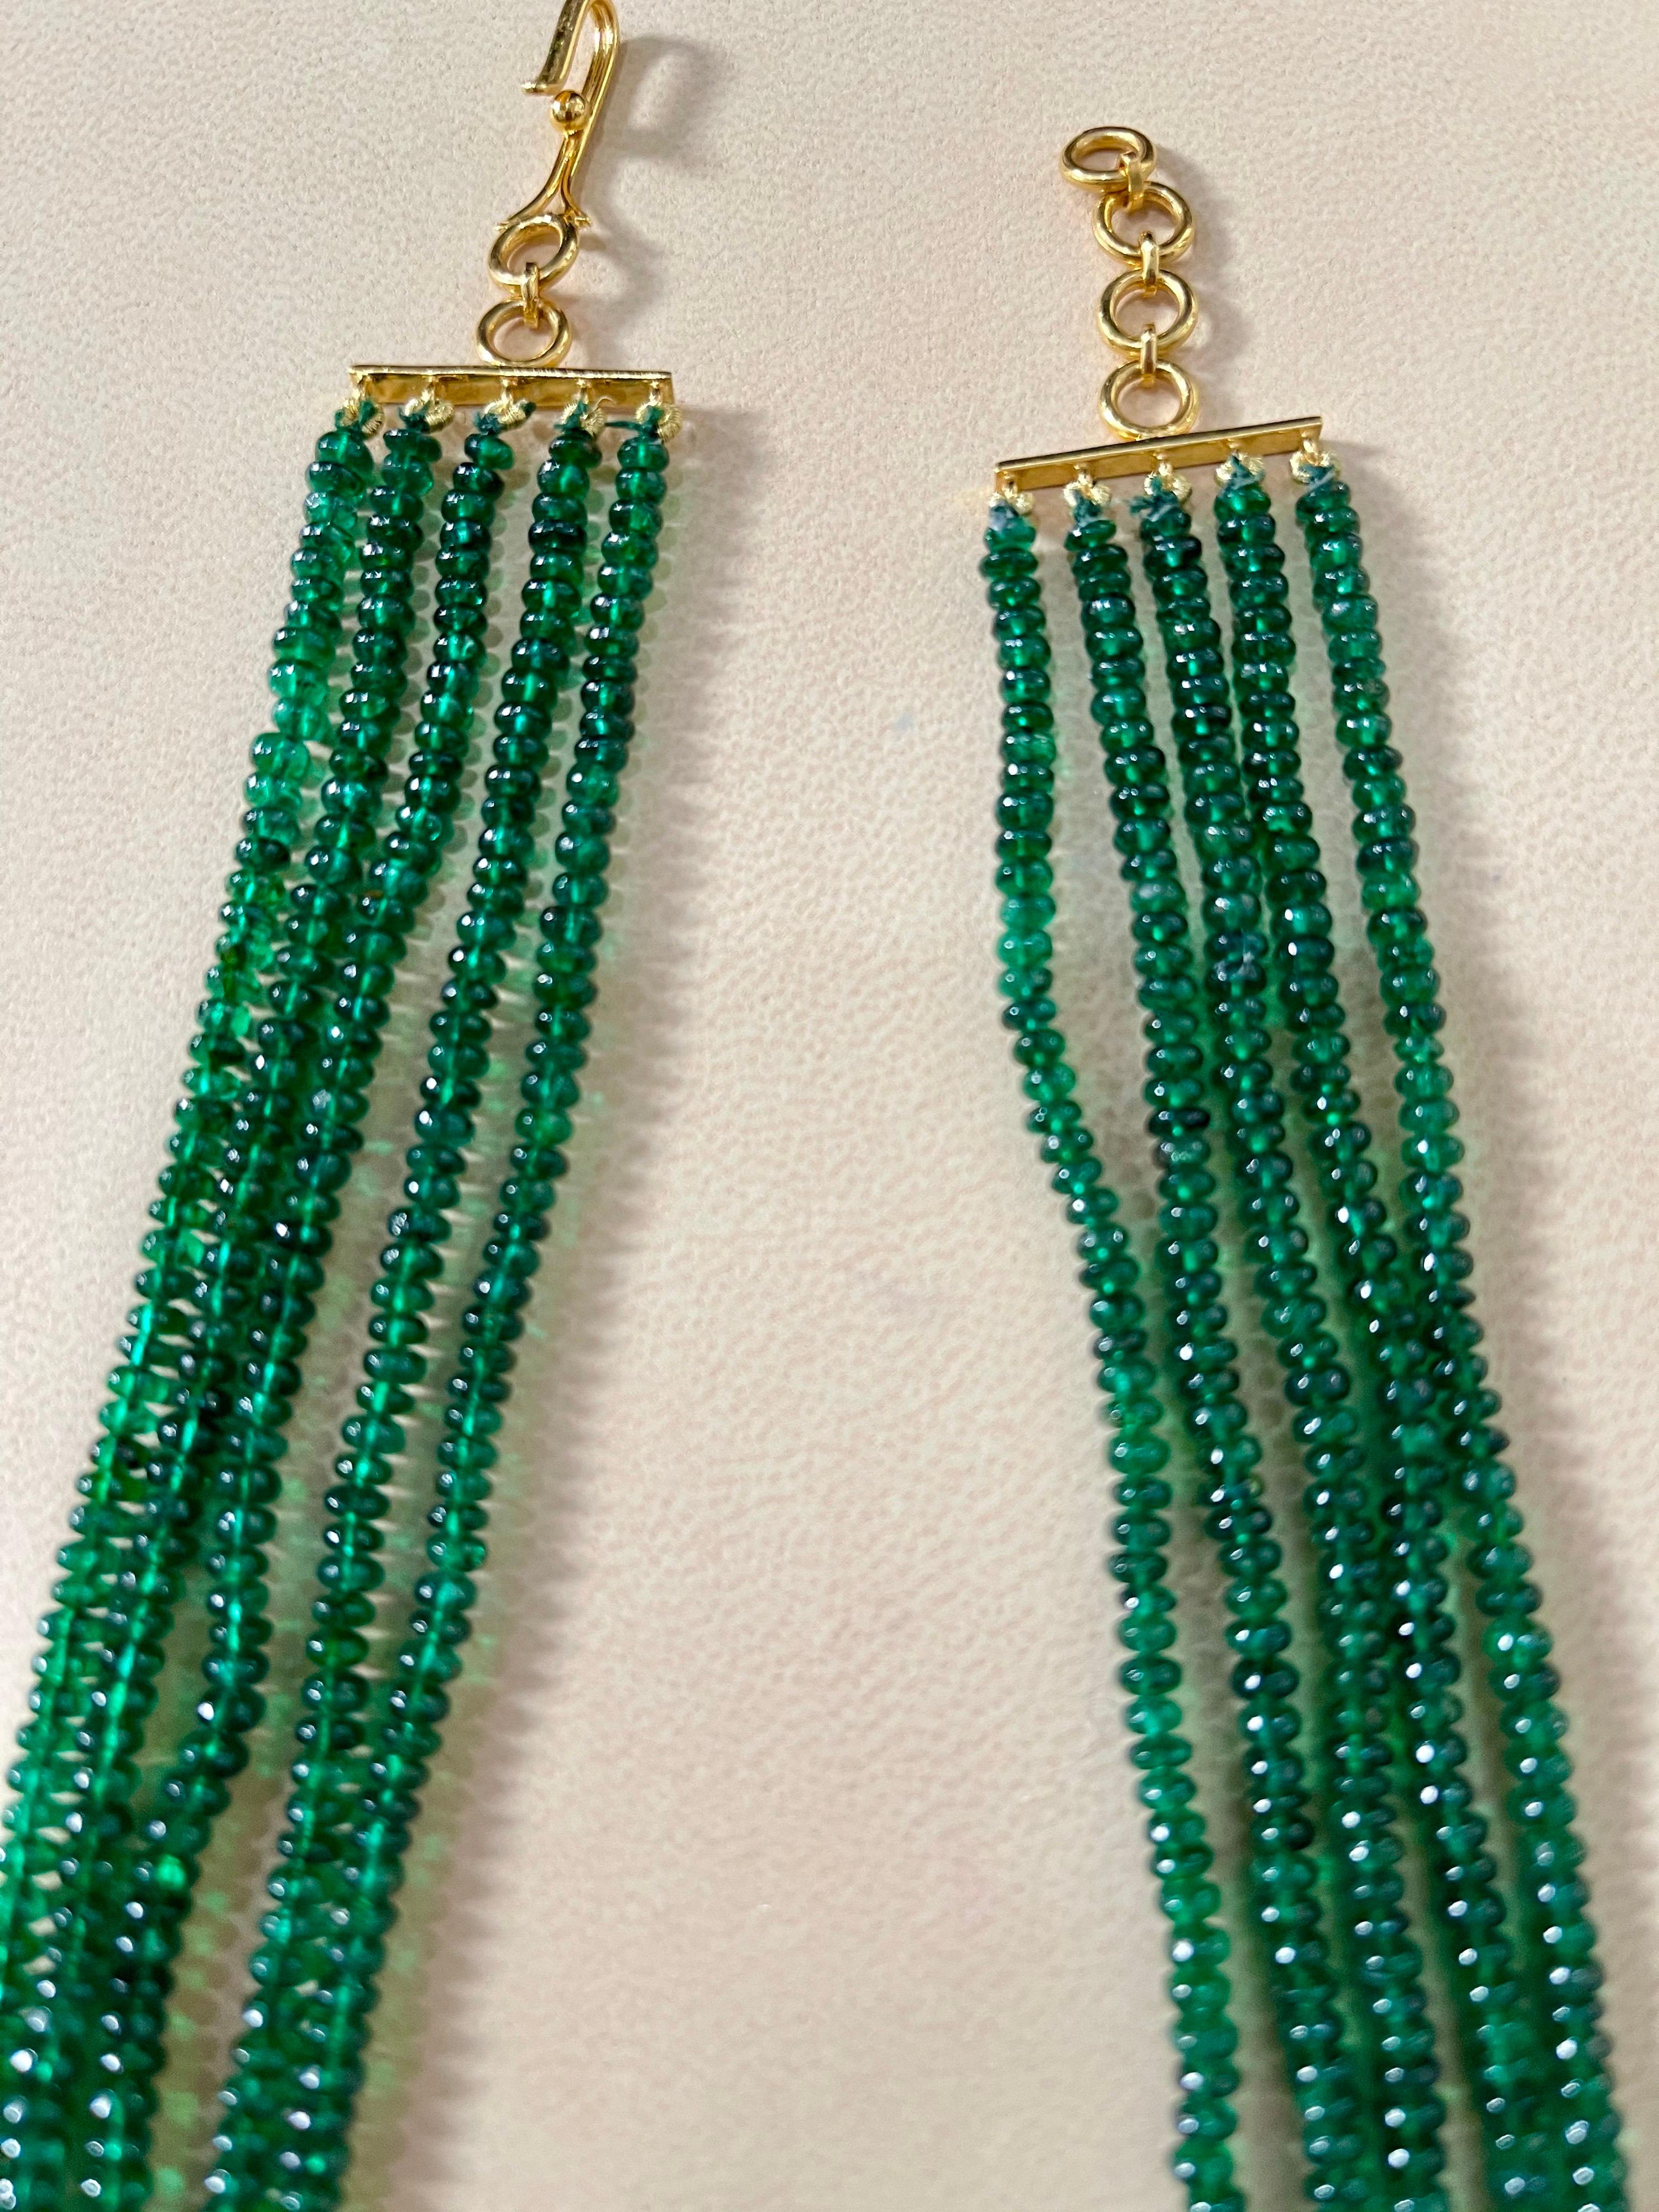 300 Carat 5-Strand Emerald Necklace with 4.8 Carat Diamond & Enamel in 14k Gold For Sale 1